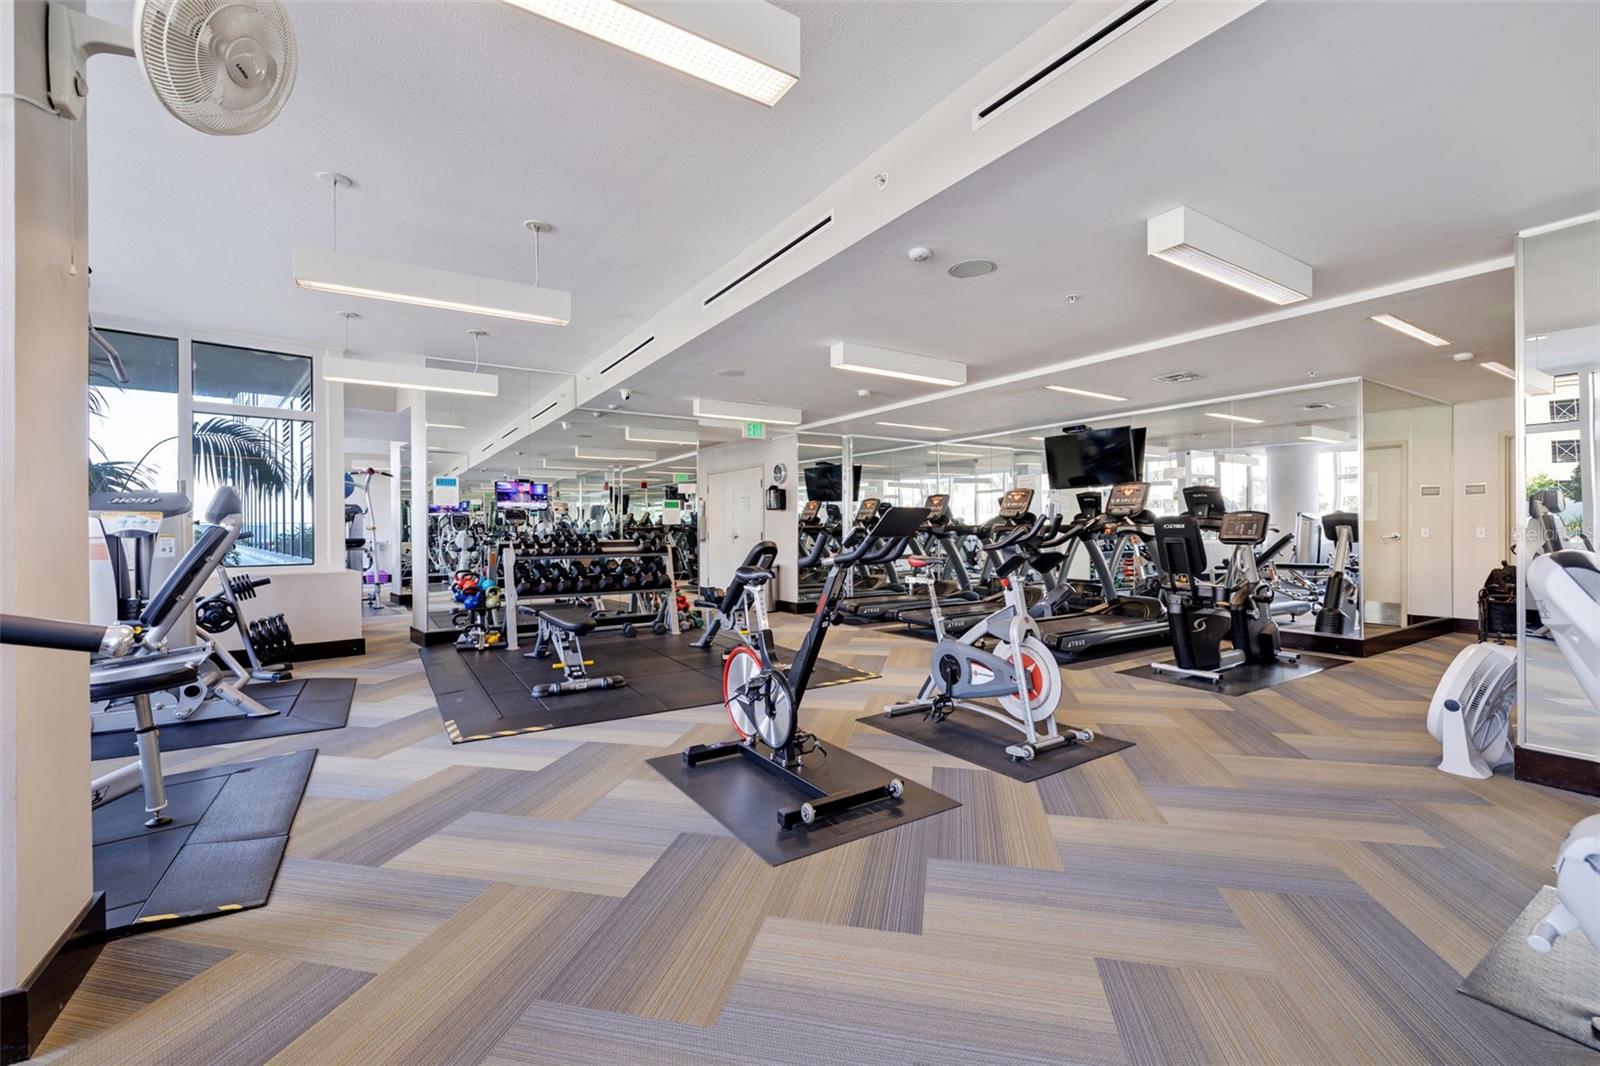 Signature Place has a huge, well equipped fitness center